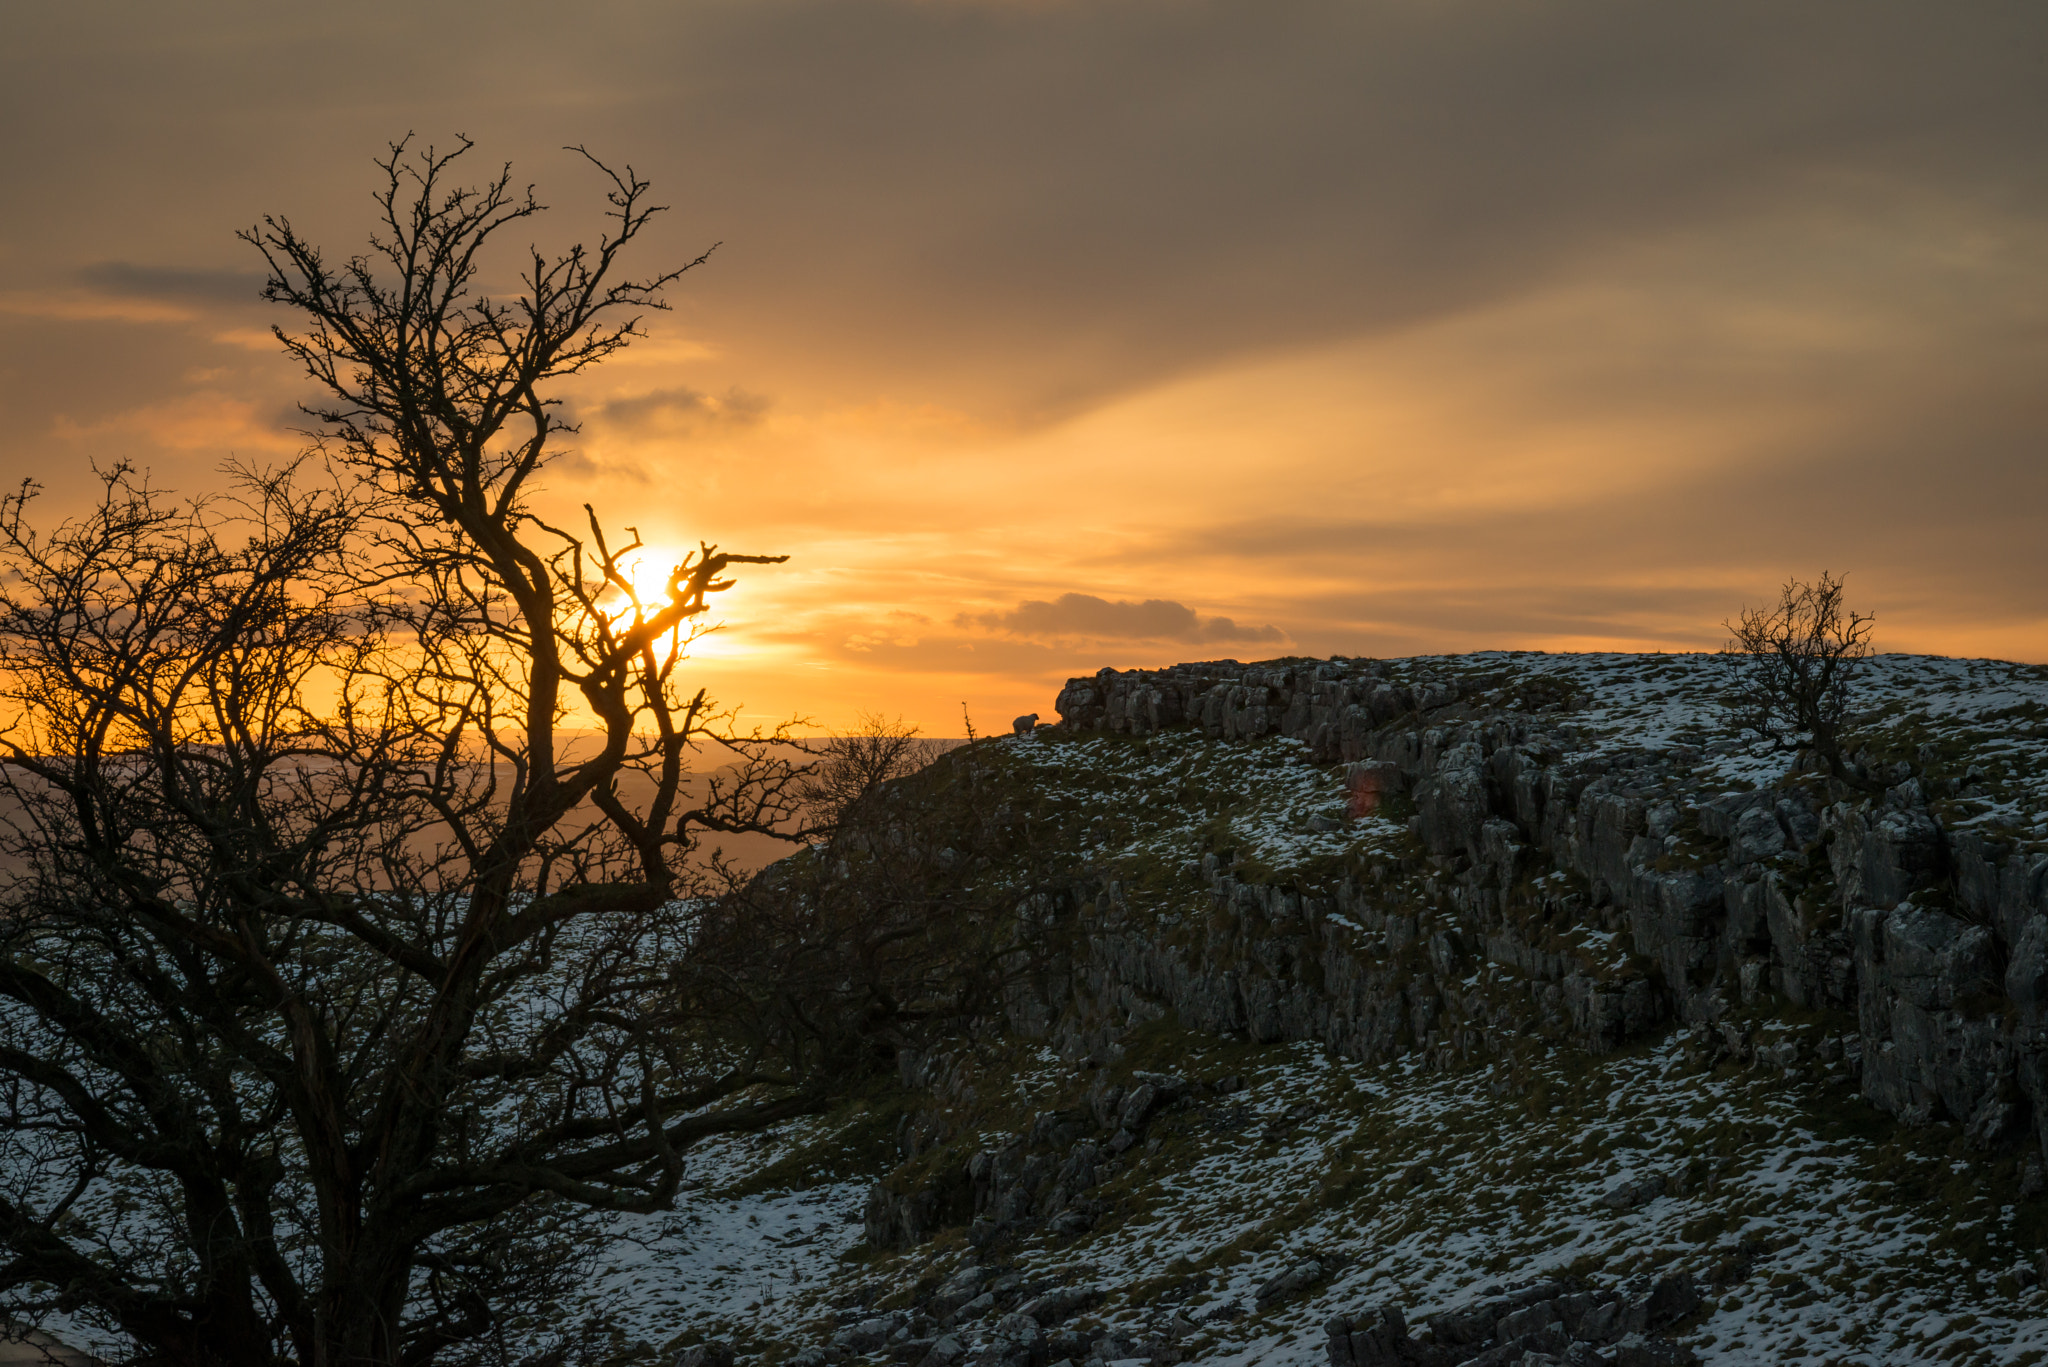 Nikon D800 + Sigma 24-105mm F4 DG OS HSM Art sample photo. Sunset on the dales photography